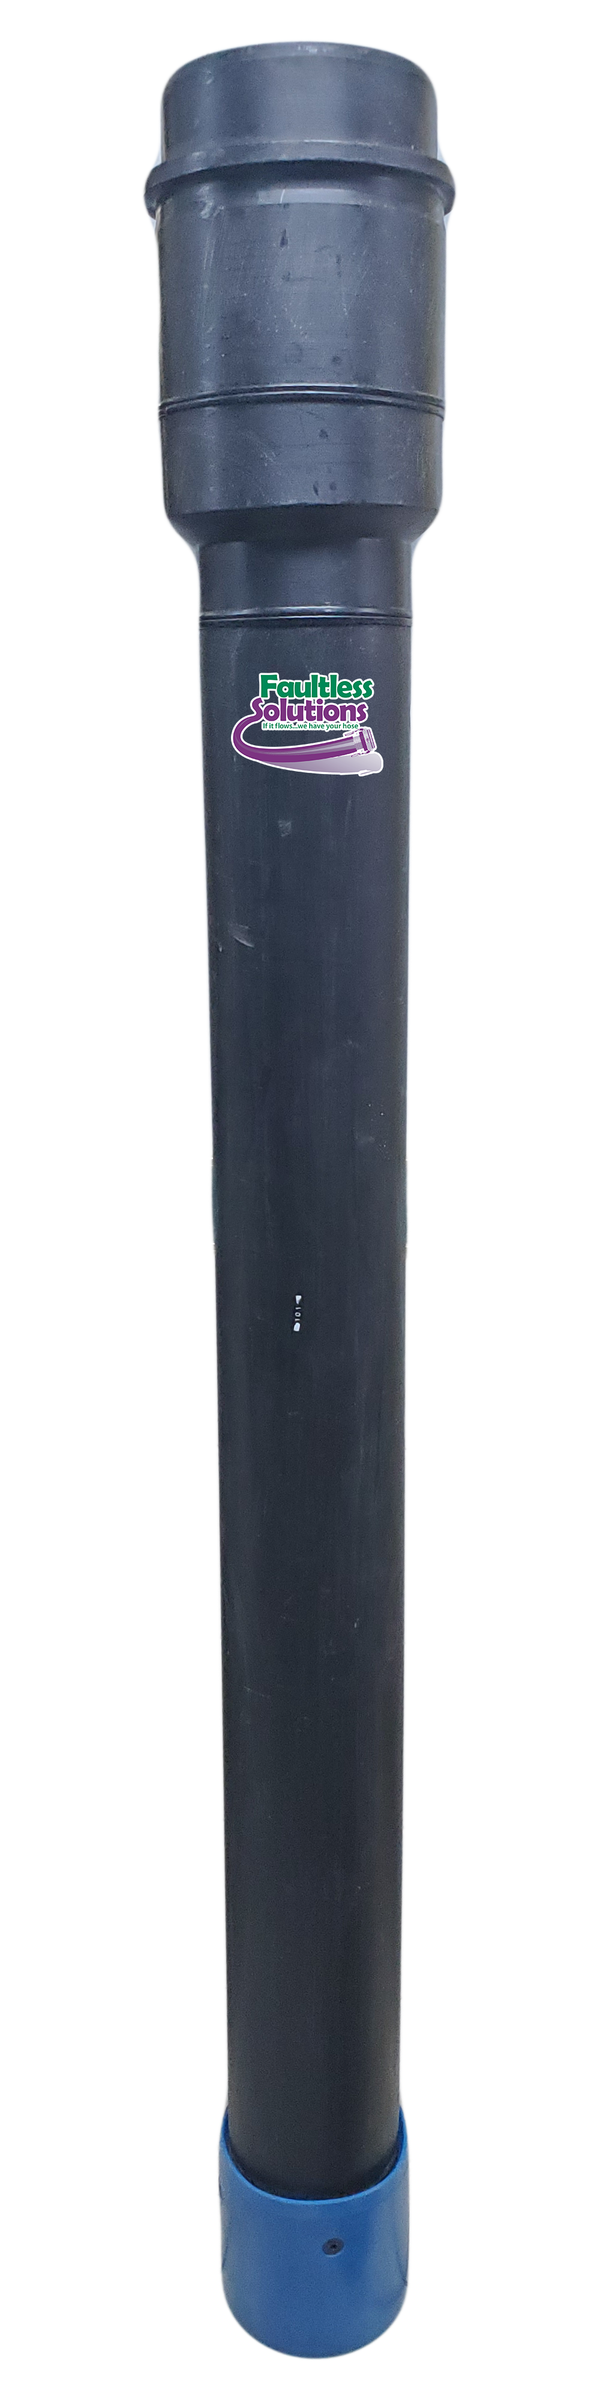 8in to 6in HDPE Reducer Polyethylene Plastic Dig Tube/Pipe for Hydro-Excavation (Hydrovac) - 6in tube with 8in Male Ringlock / Bandlock (Bush Hog) x Cuff (Urethane) - Overall Length/Height is 78in